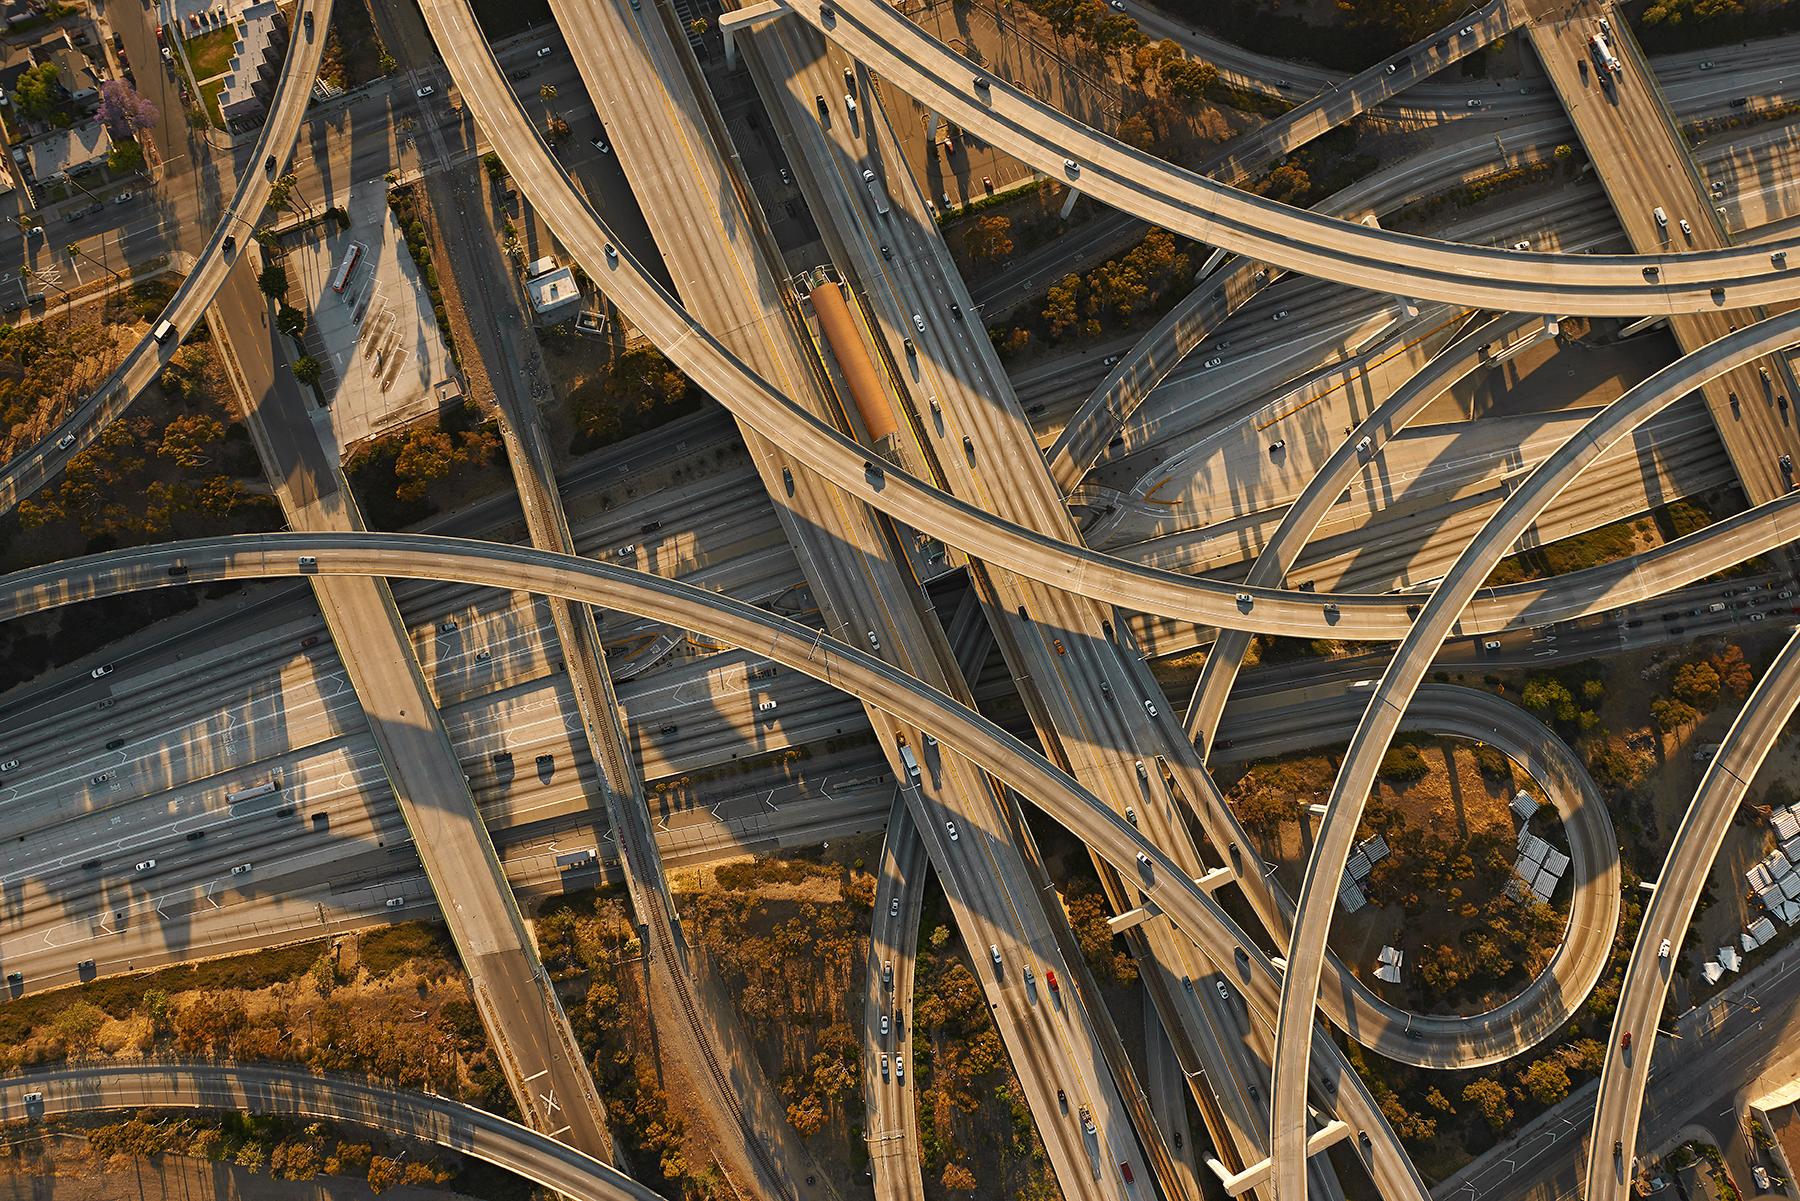 Los Angeles II
Digital C-Print / Archival Pigment Print
Edition of 10 per size
Available sizes:
40 x 60 in
60 x 90 in

Since its inception, Lusztyk’s Interchanges project has taken the artist all over the world in search of a very particular